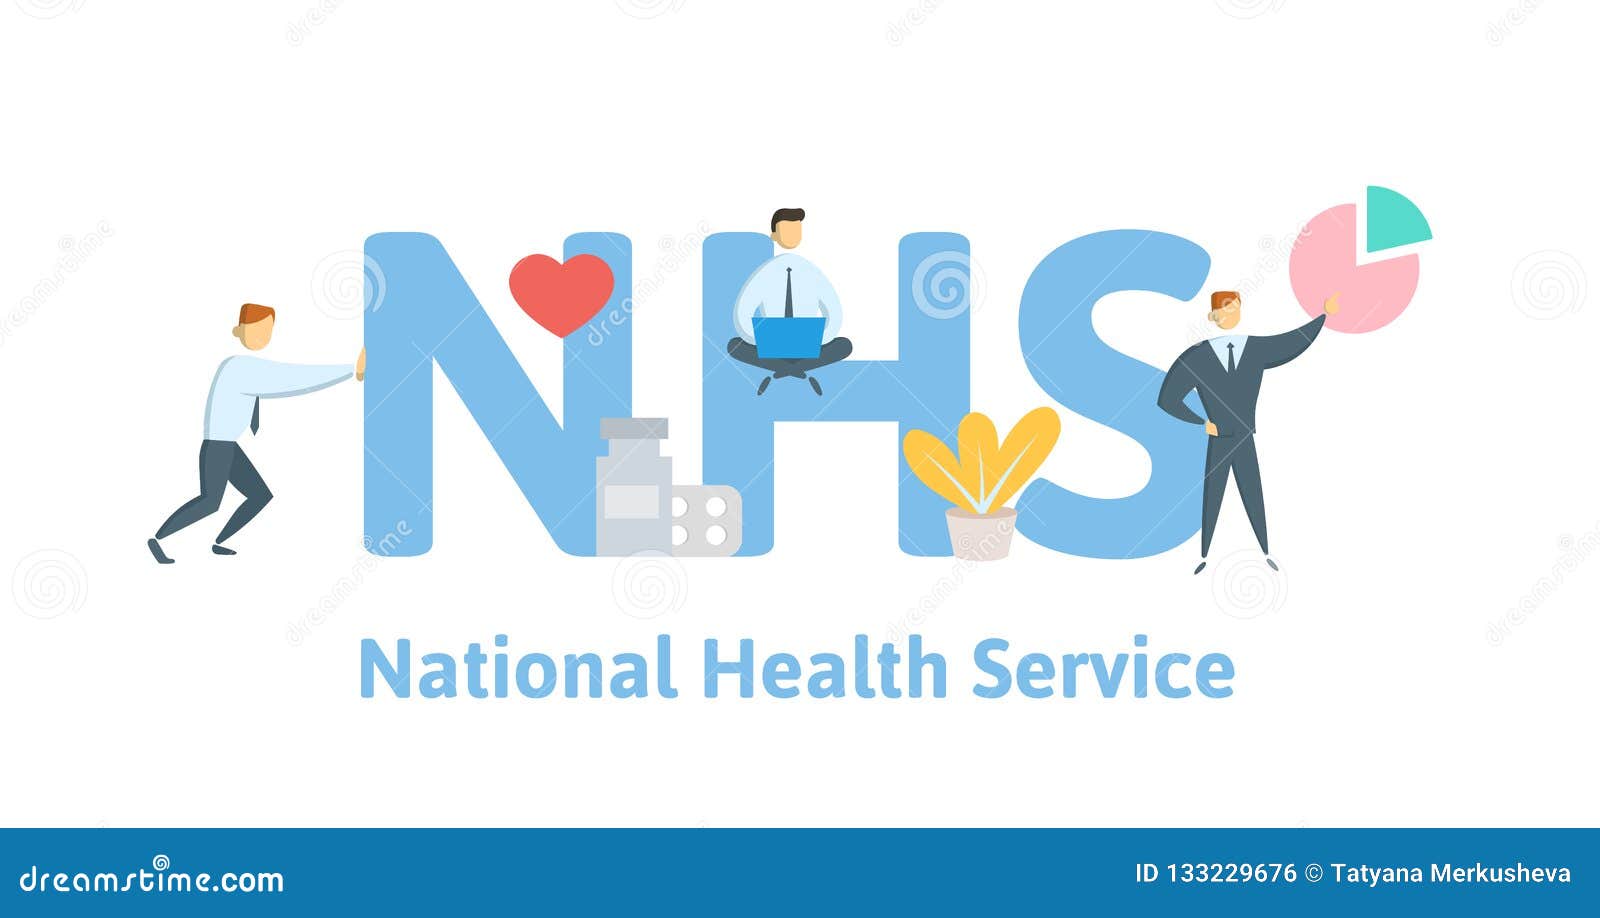 nhs, national health service. concept with keywords, letters and icons. flat   on white background.